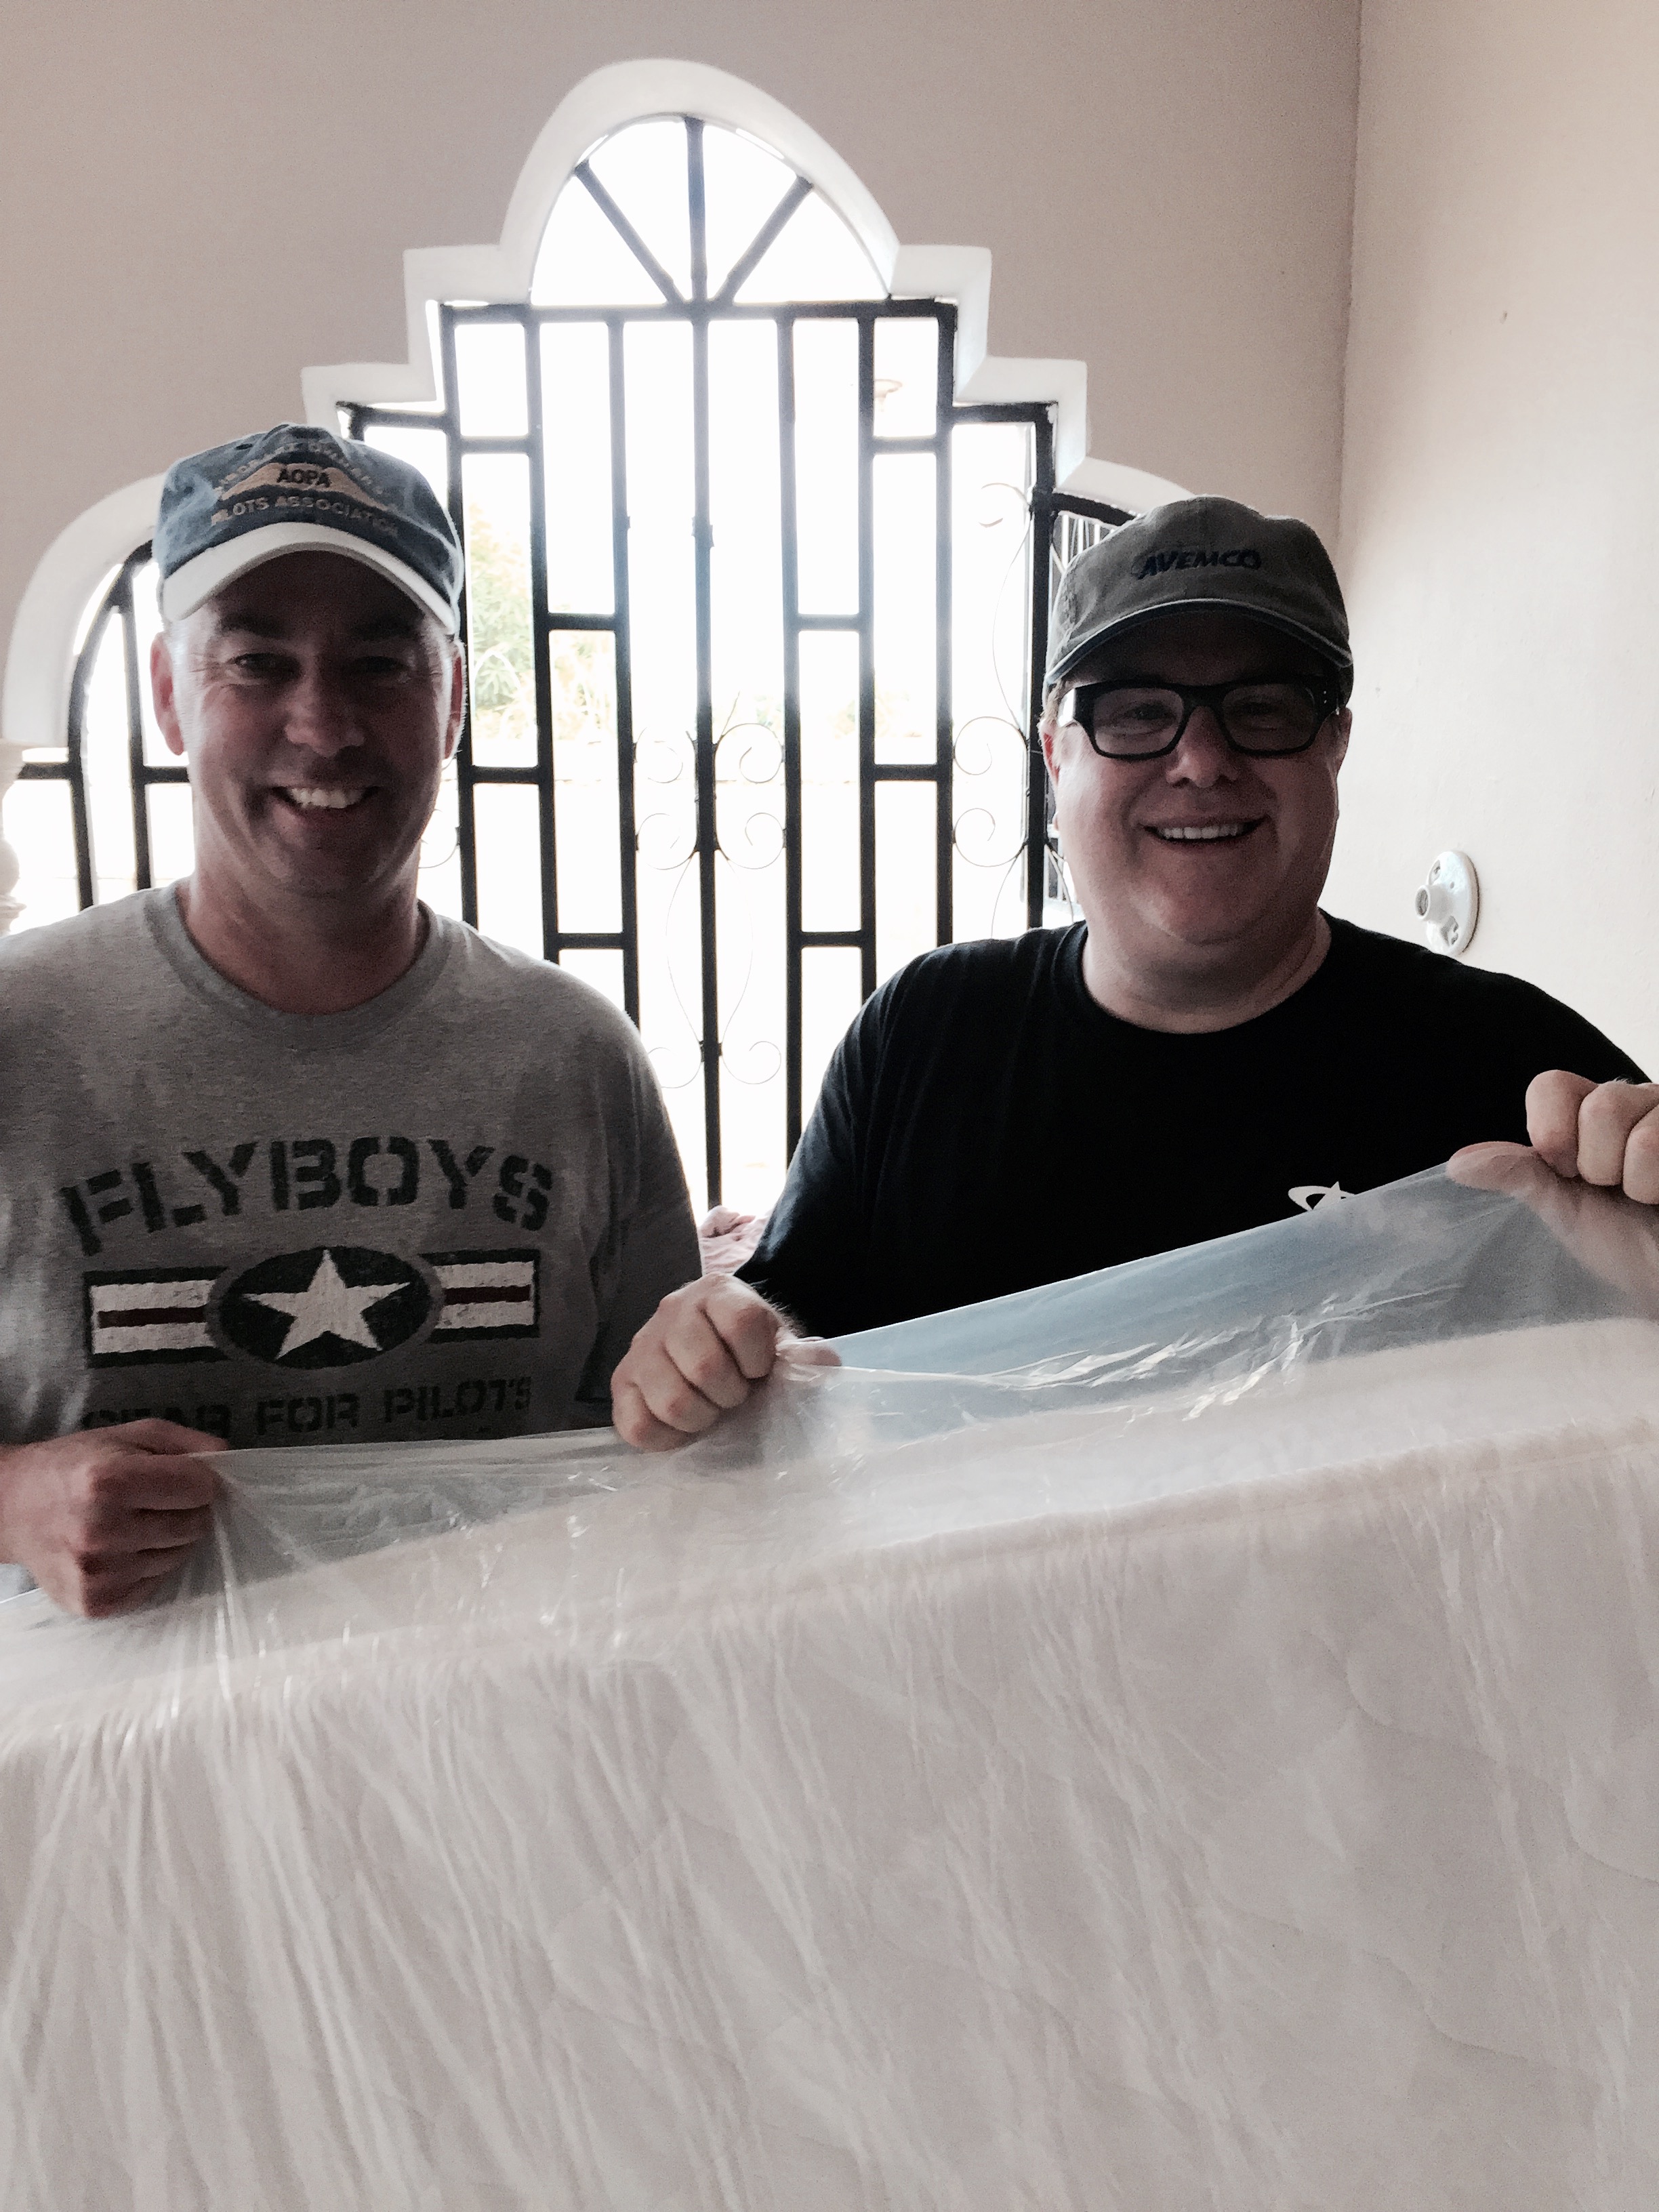 Paul Mengert and Sam Schoolfield hold up a mattress delivered to the orphanage.